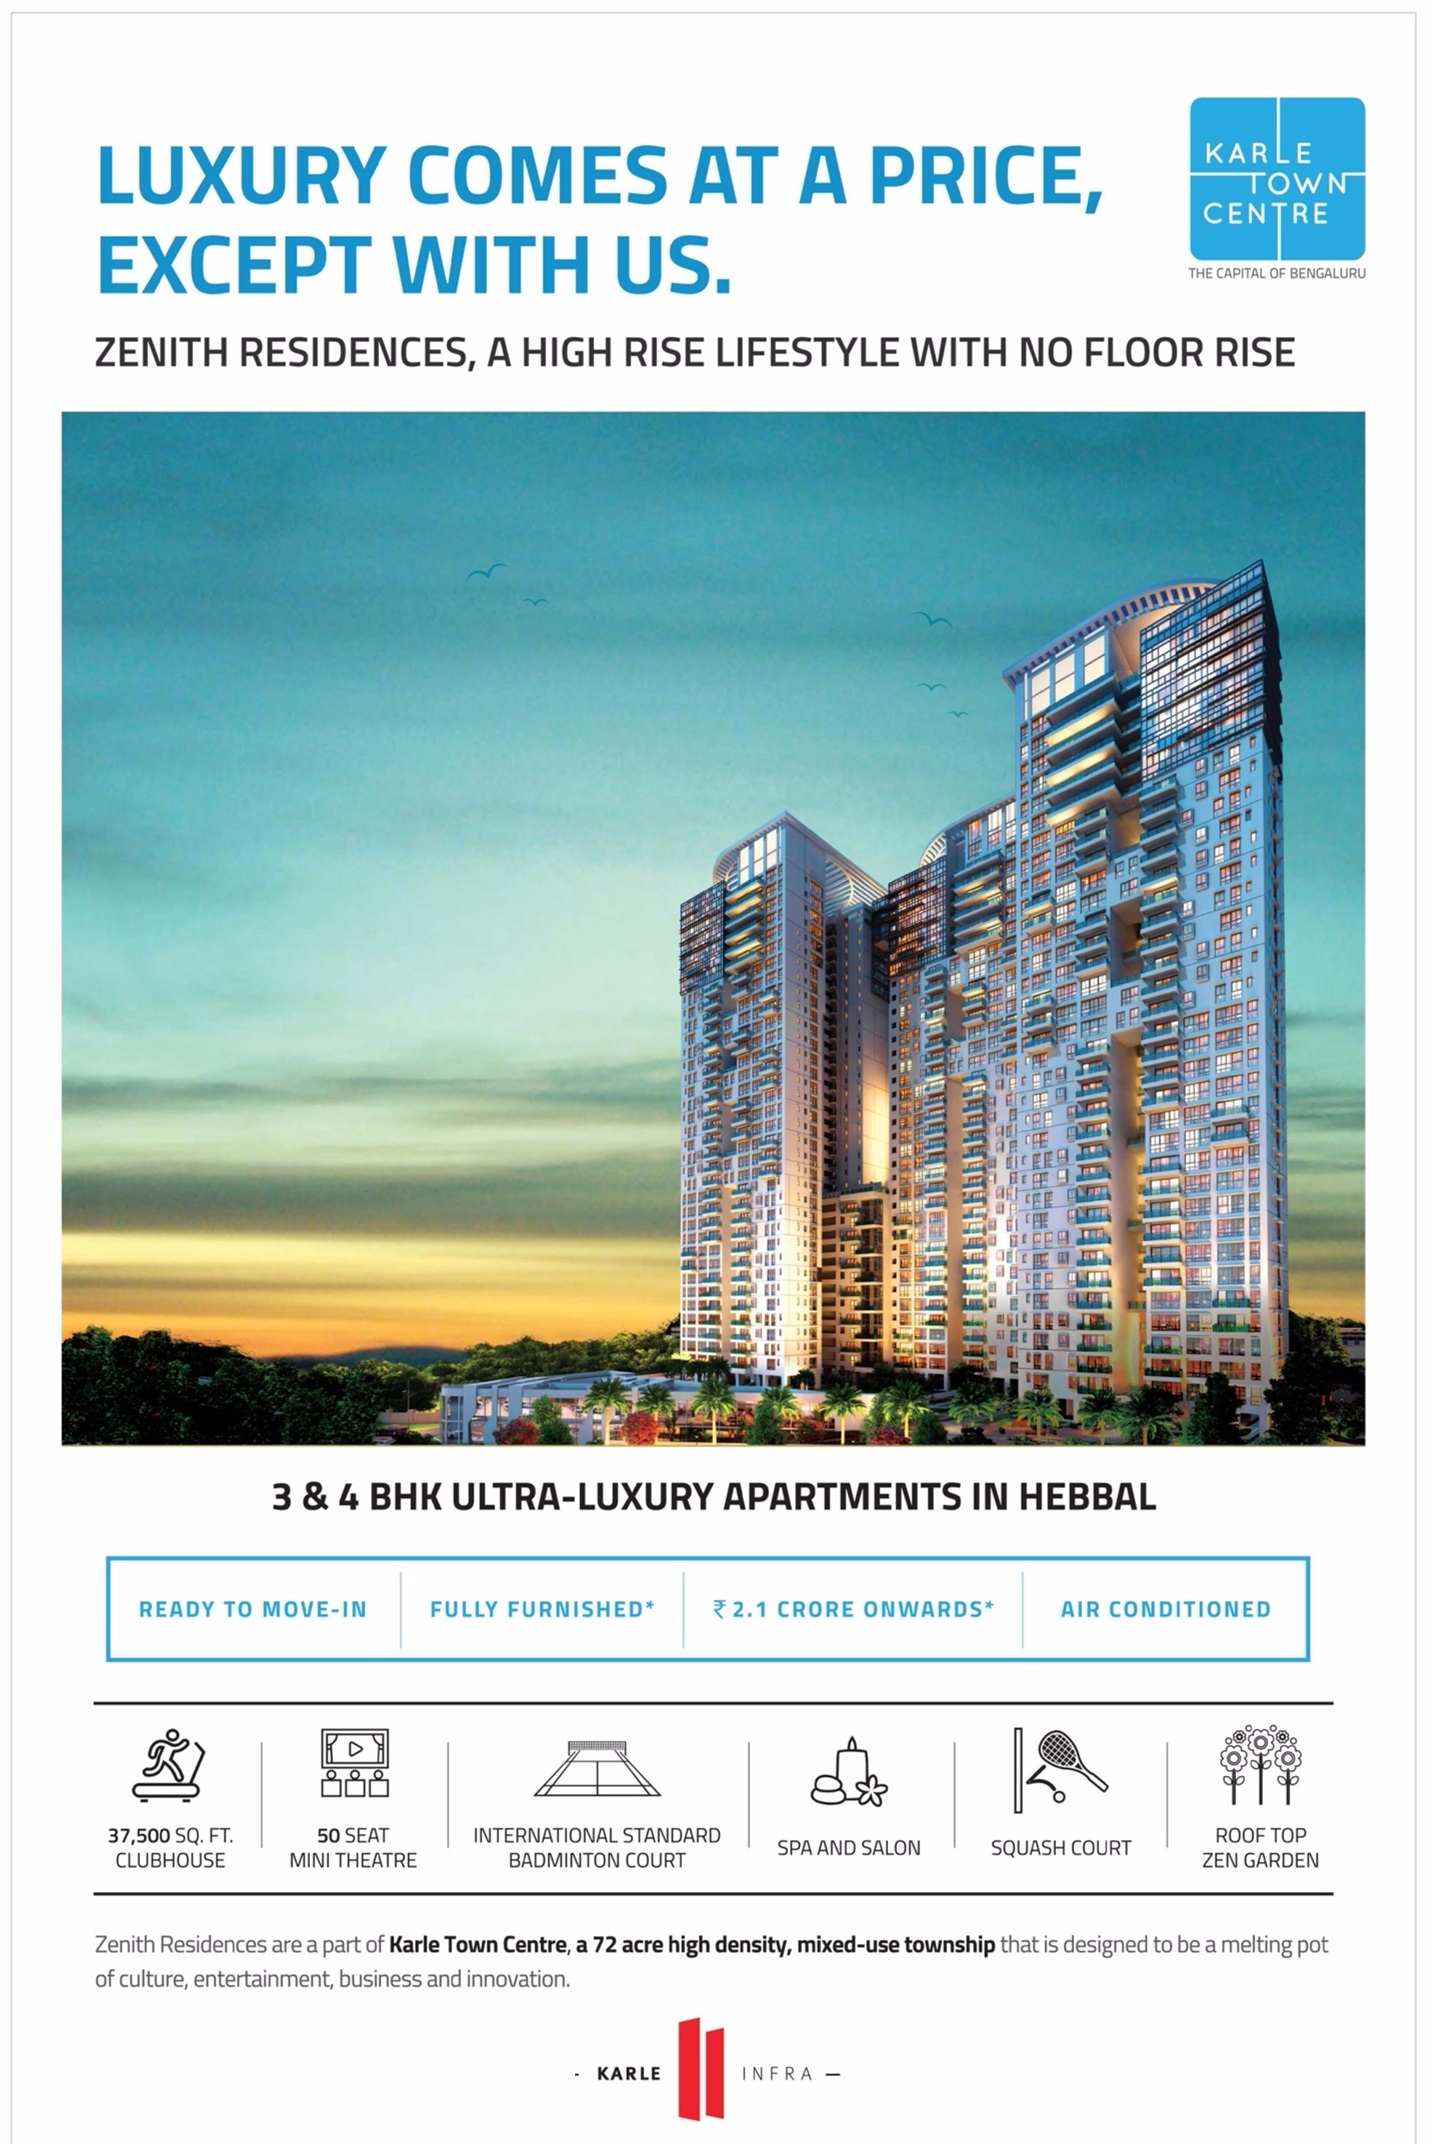 Experience a luxurious life with 3 & 4 BHK ultra luxury apartments at Karle Town Centre, Bangalore